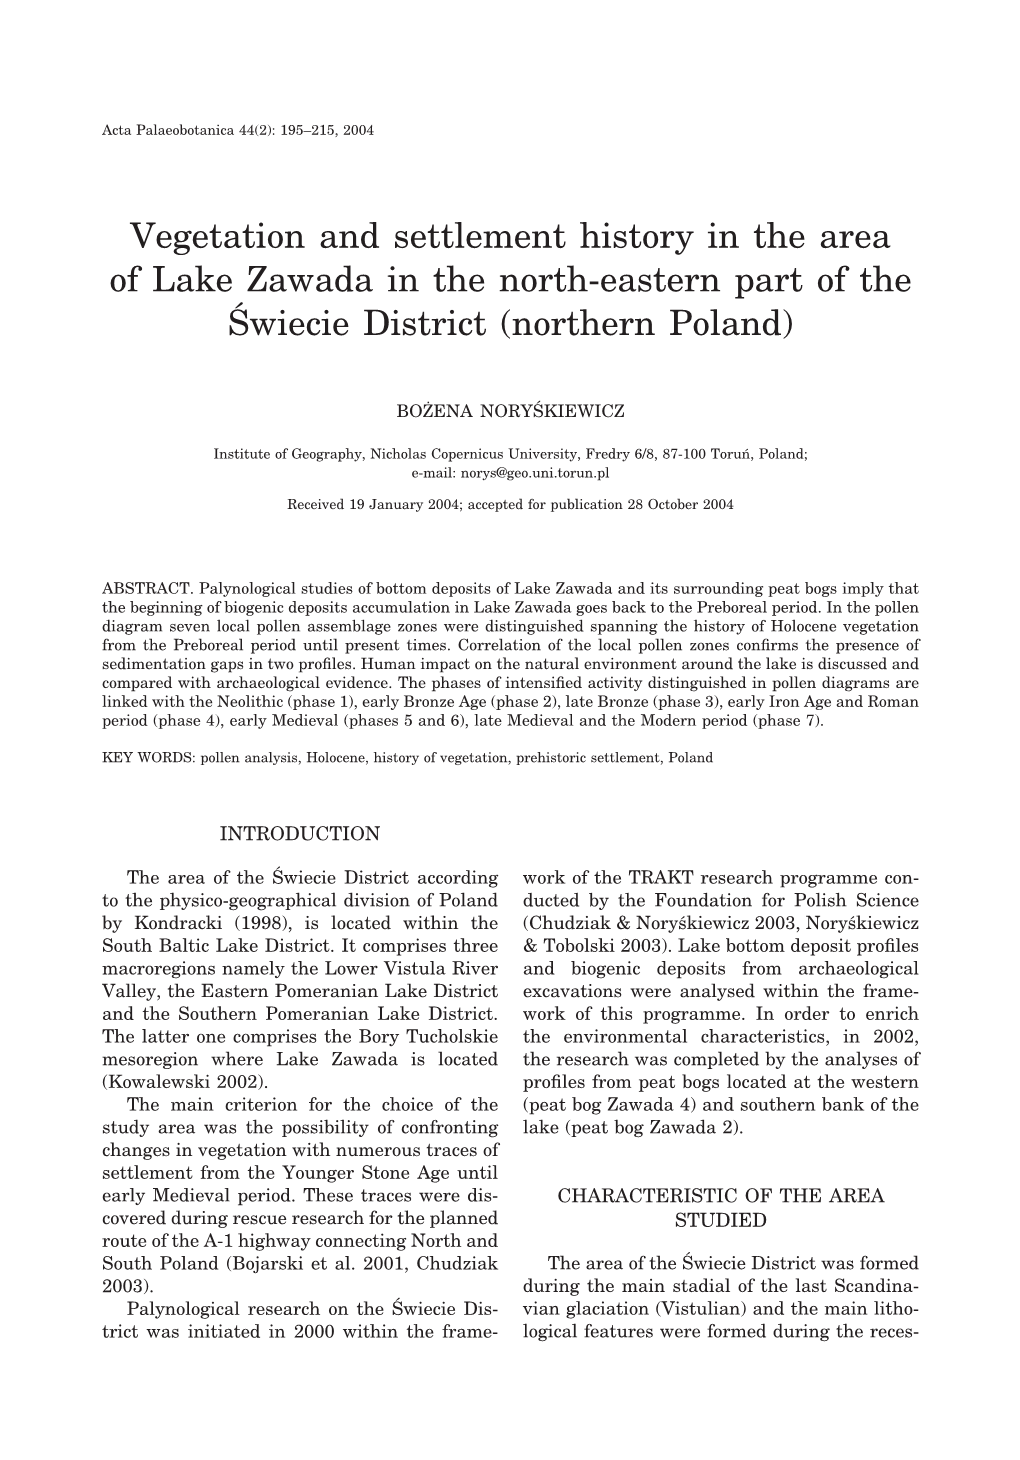 Vegetation and Settlement History in the Area of Lake Zawada in the North-Eastern Part of the Świecie District (Northern Poland)